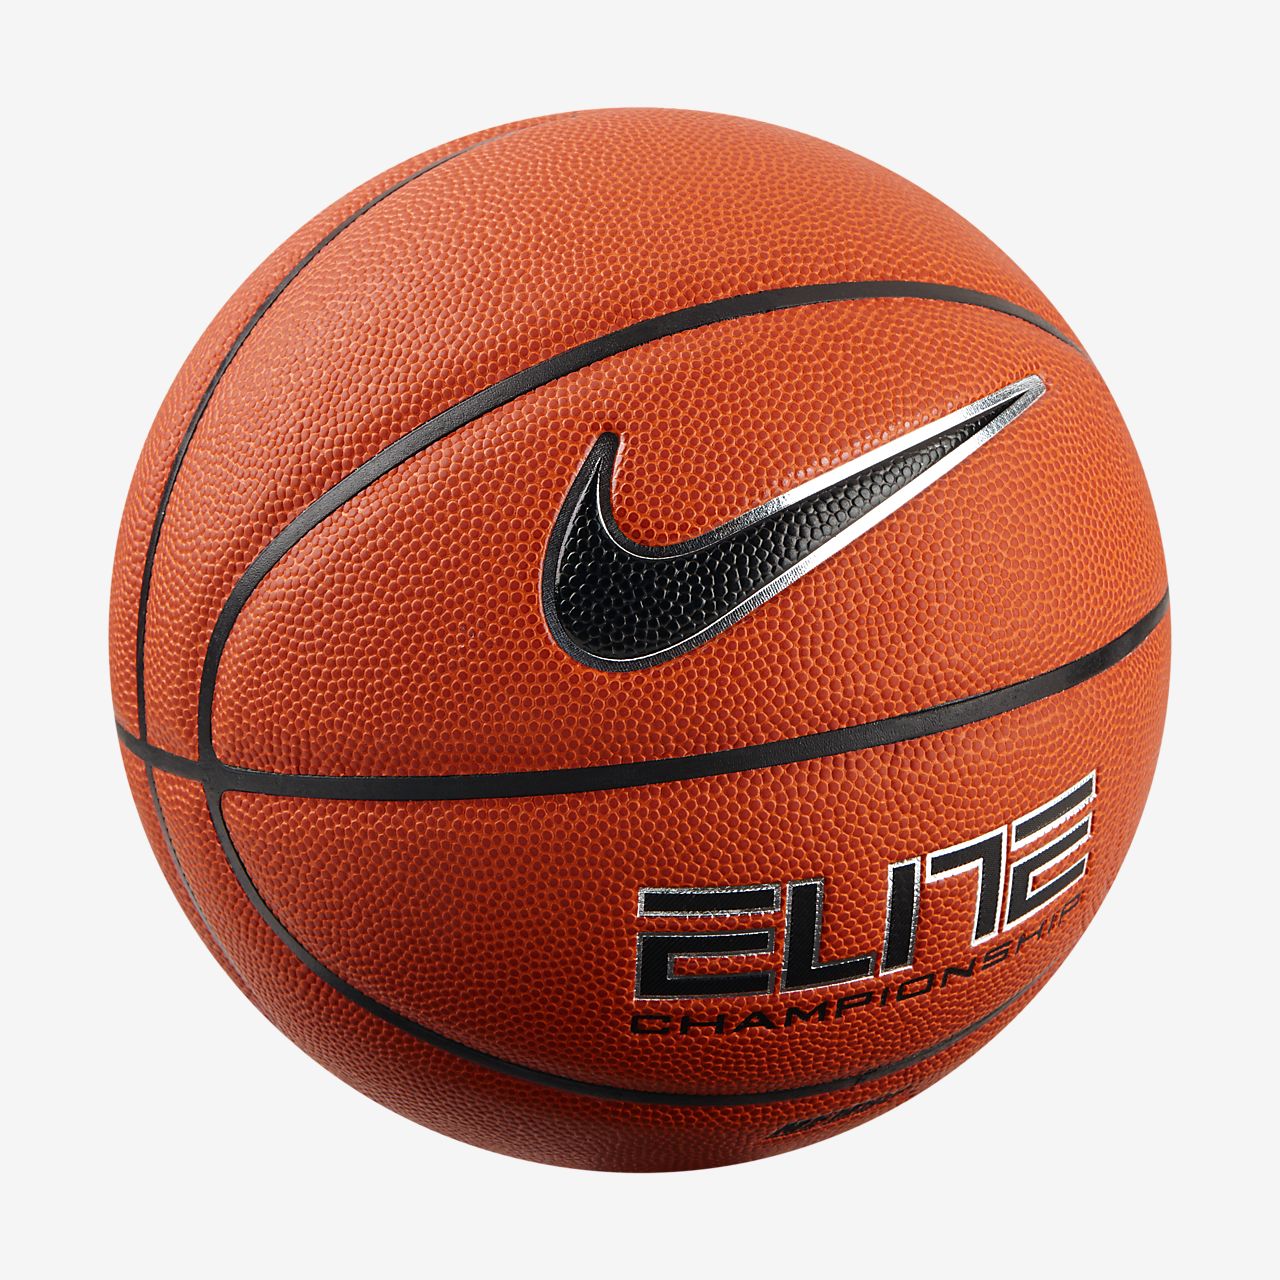 love this ball (it's the one BYU uses in their practice facility):